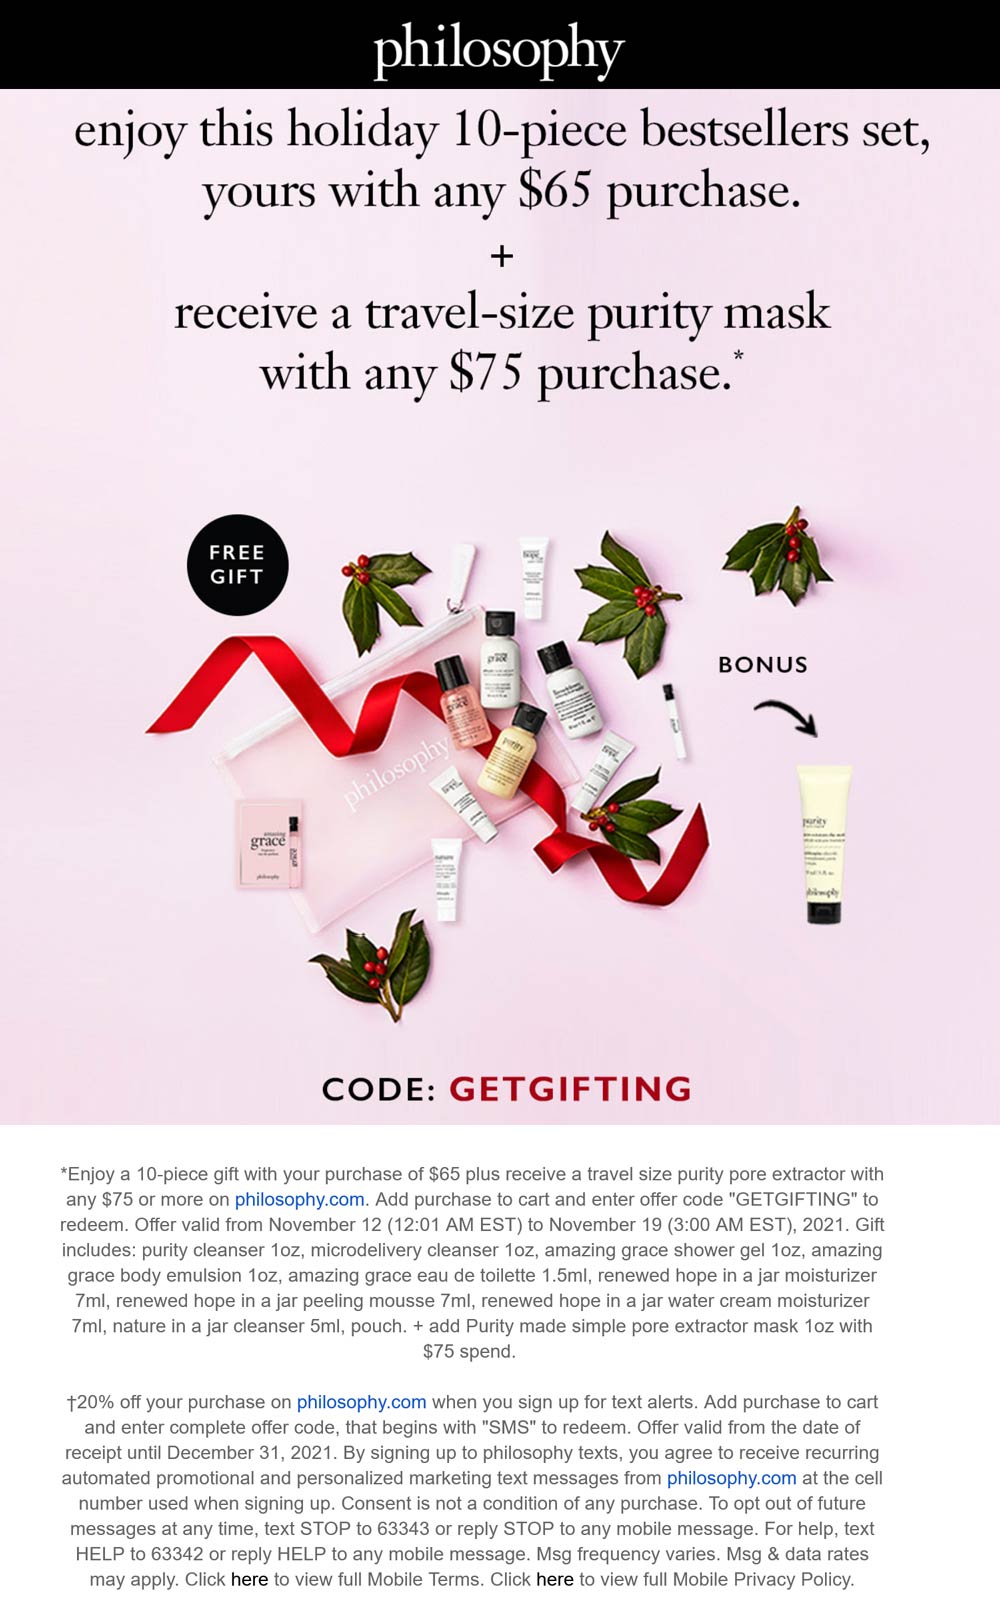 Philosophy stores Coupon  Free 10pc with $65 at Philosophy via promo code GETGIFTING #philosophy 